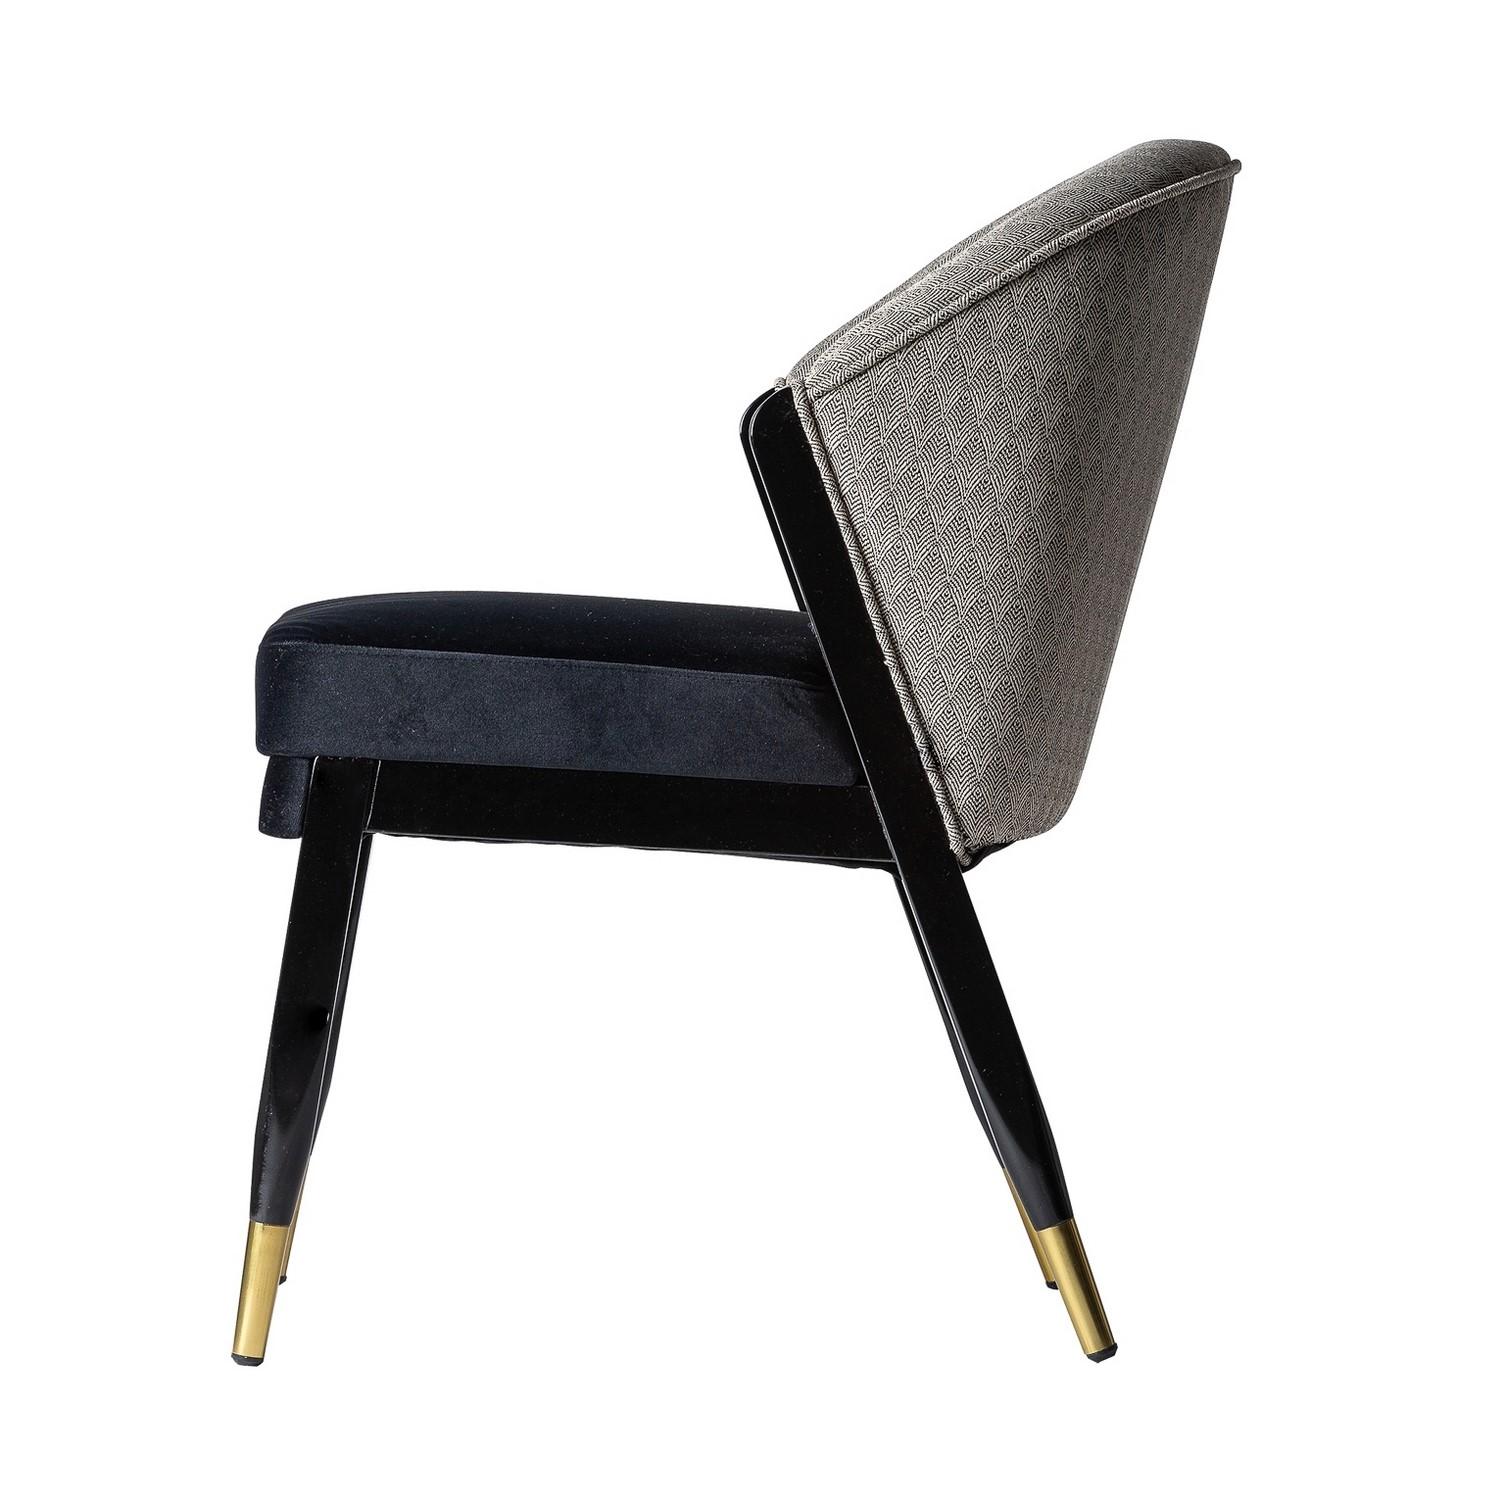 Midcentury style chair in a black lacquered wooden frame with gold feet finish adorned with graphic fabric back and velvet seat. Around the dining table, it will be perfect near your desk or dressing table too!